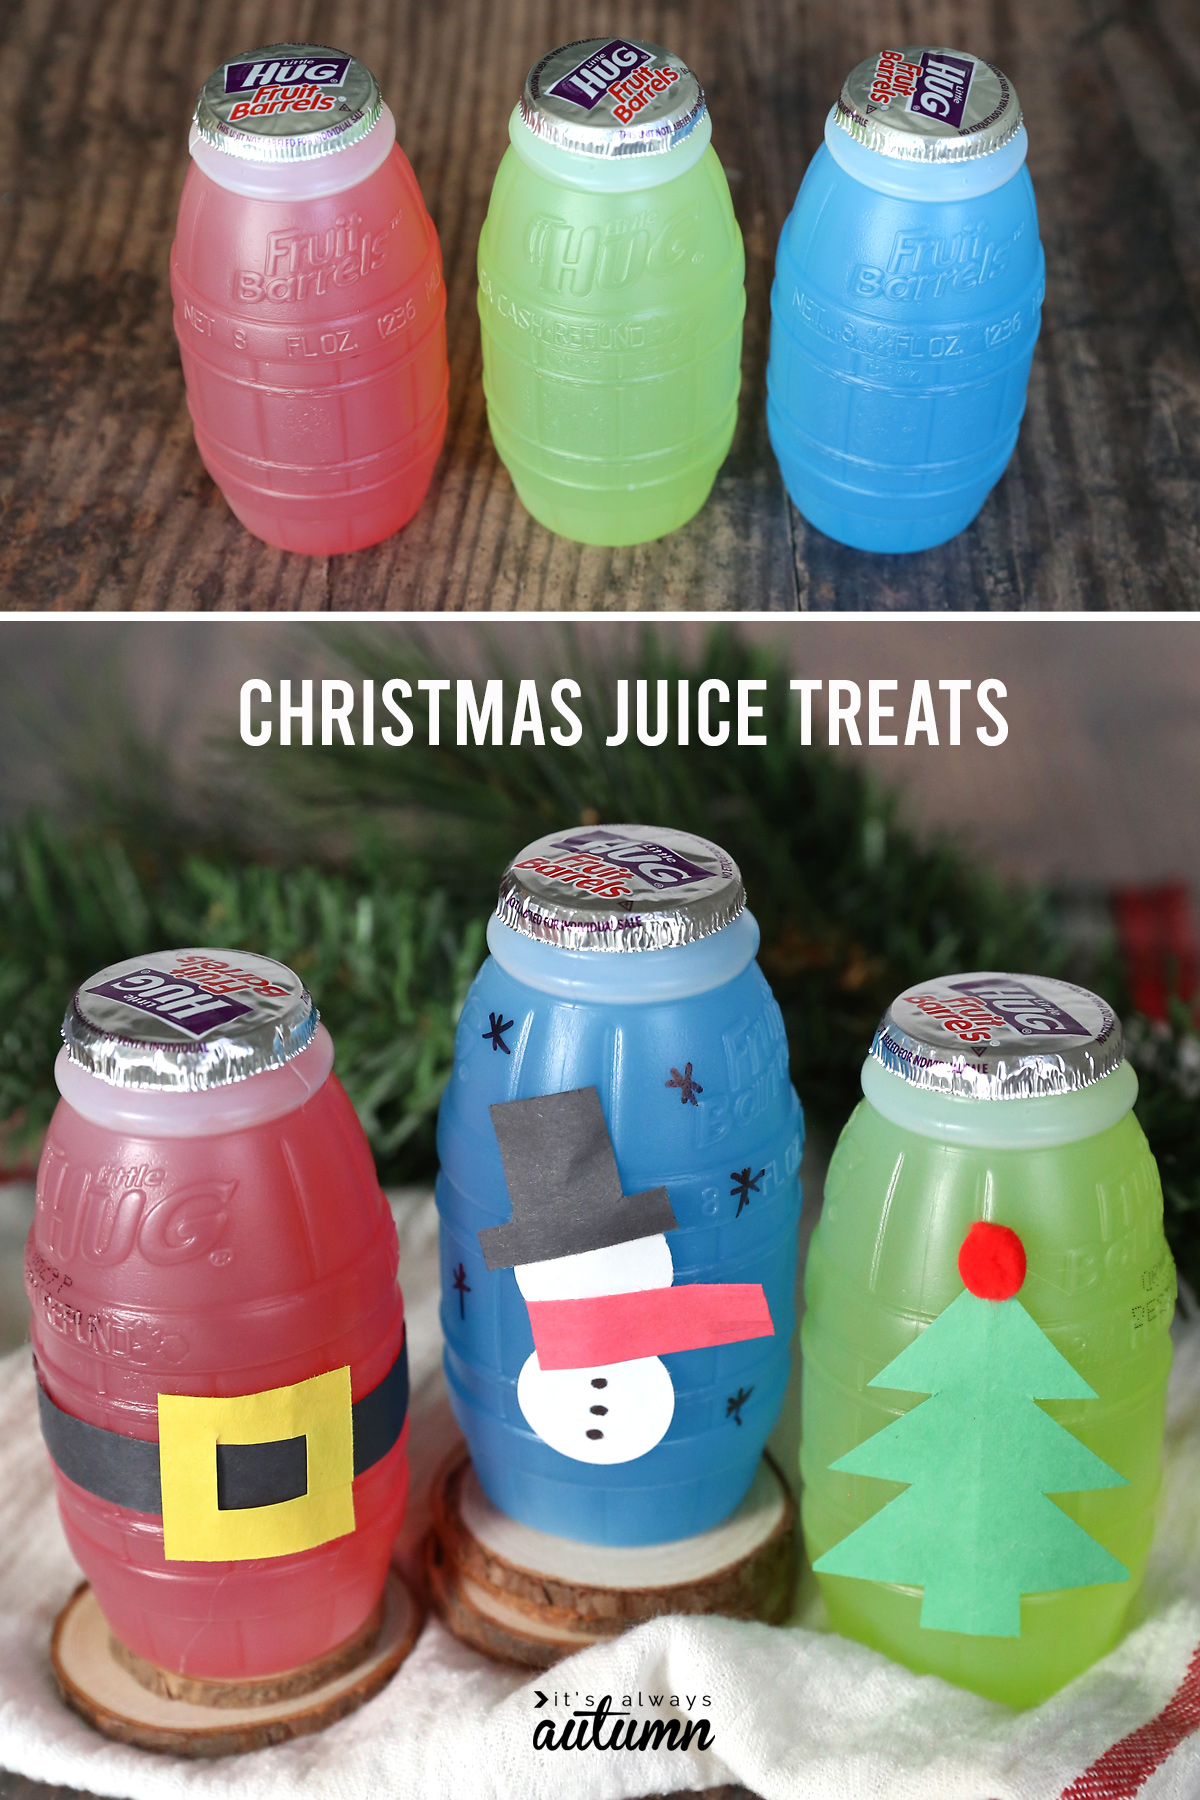 Red, green and blue juice treat jugs decorated with construction paper for Christmas